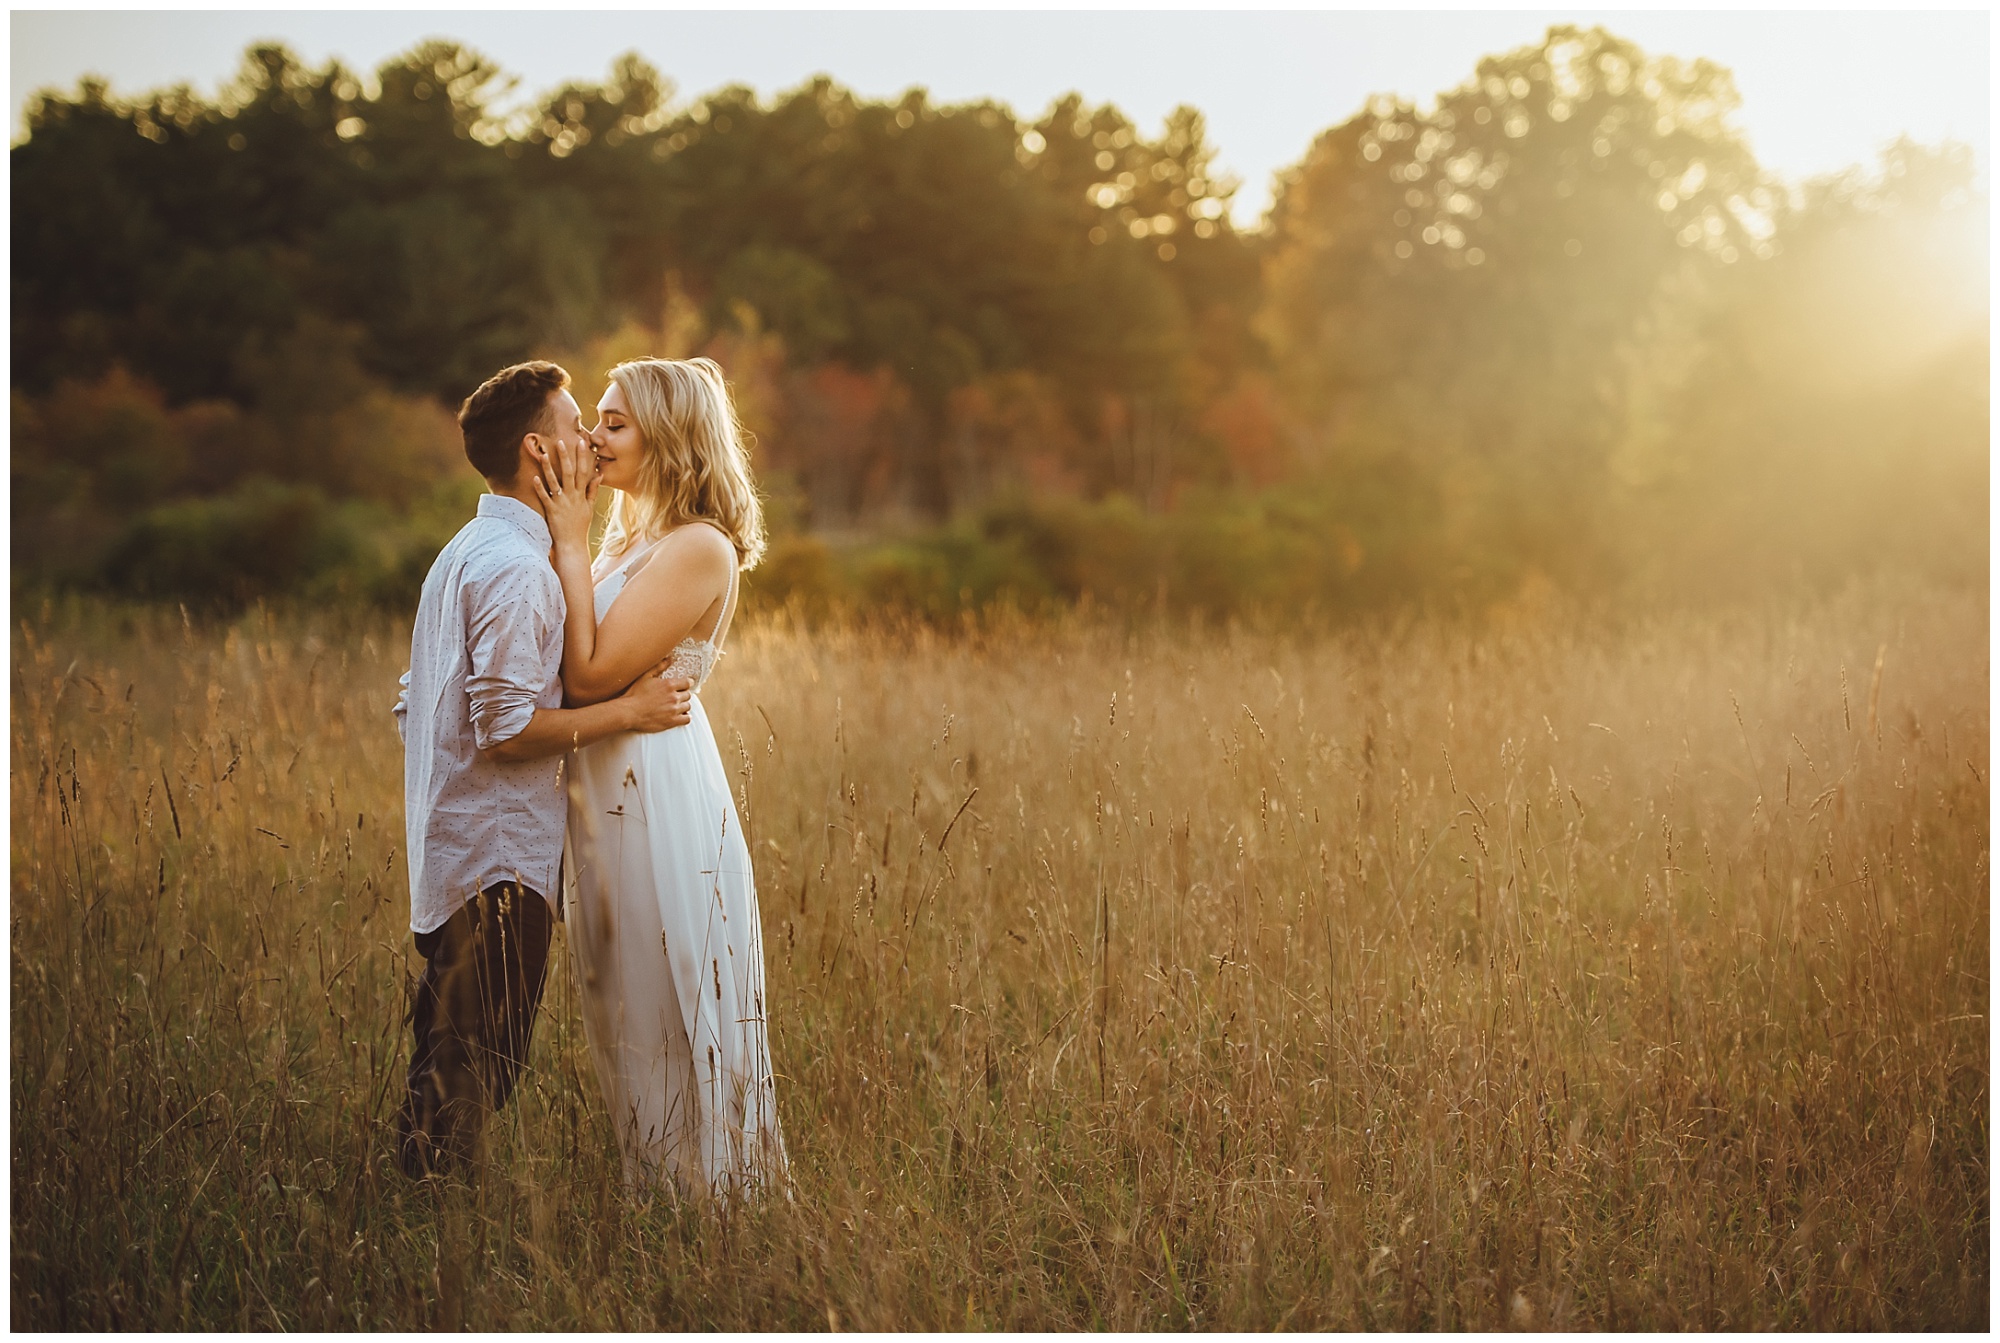 Just A Moment | North Andover Photographer | Engagement Session